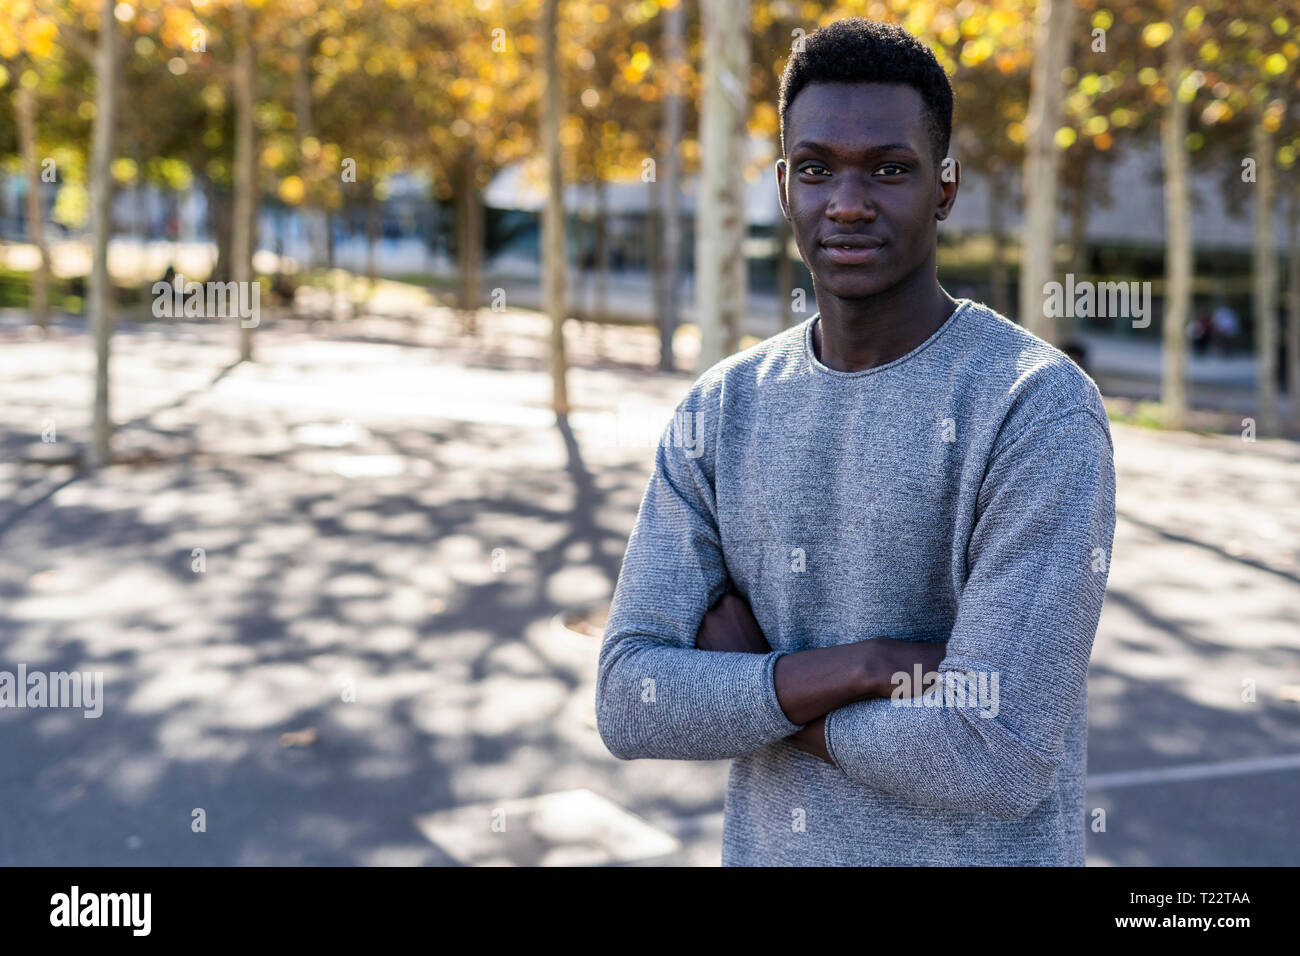 Portrait of a confident young man, standing in a park Stock Photo